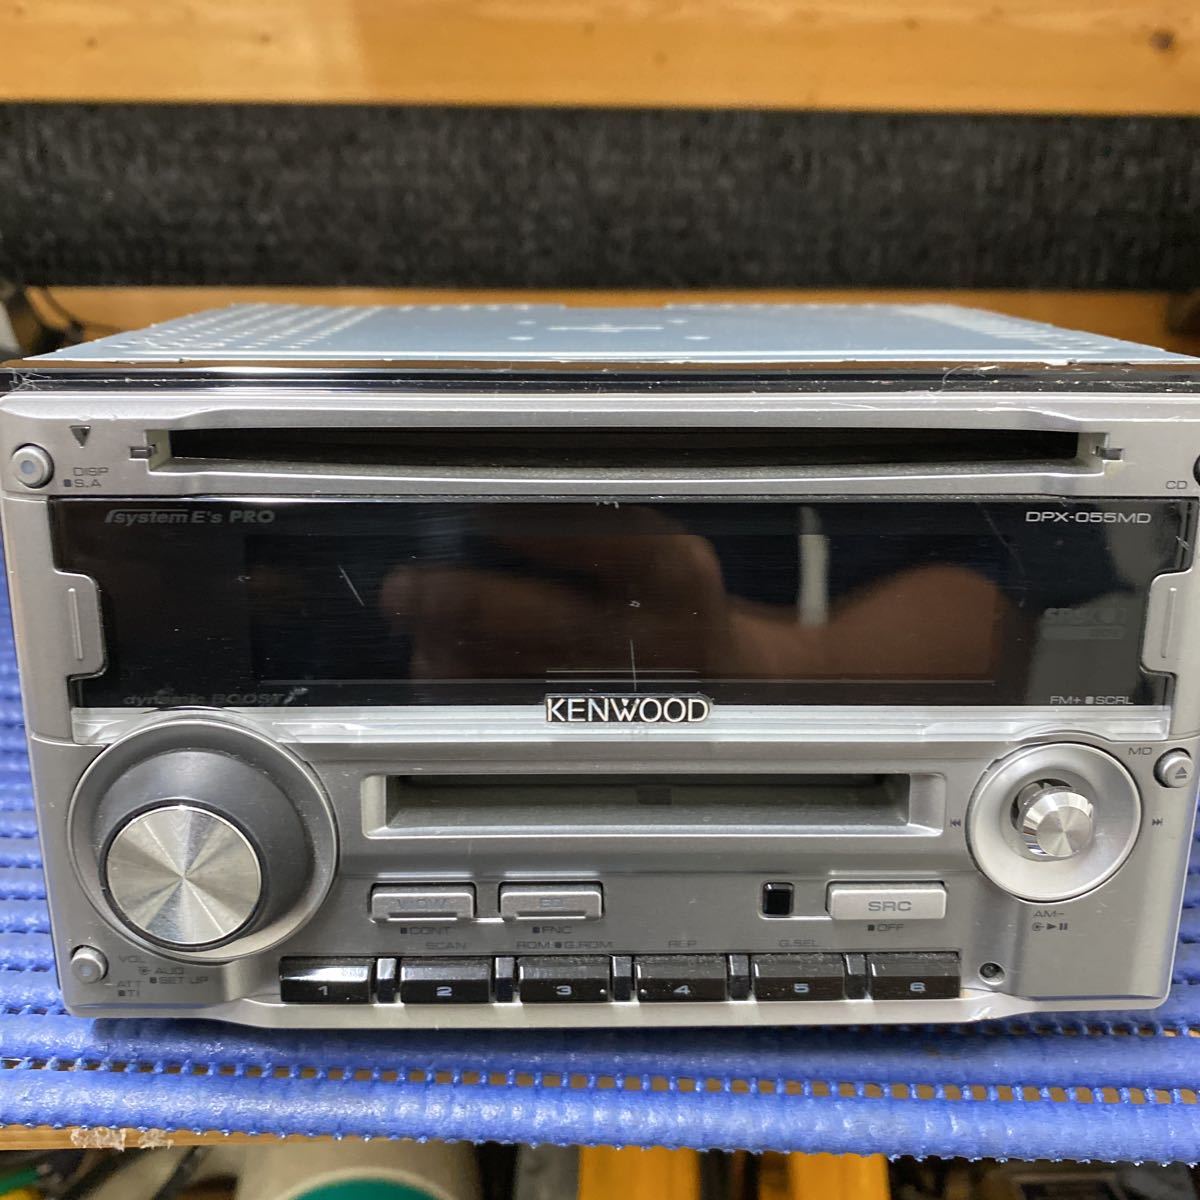 KENWOOD CD/MD DPX-055MD